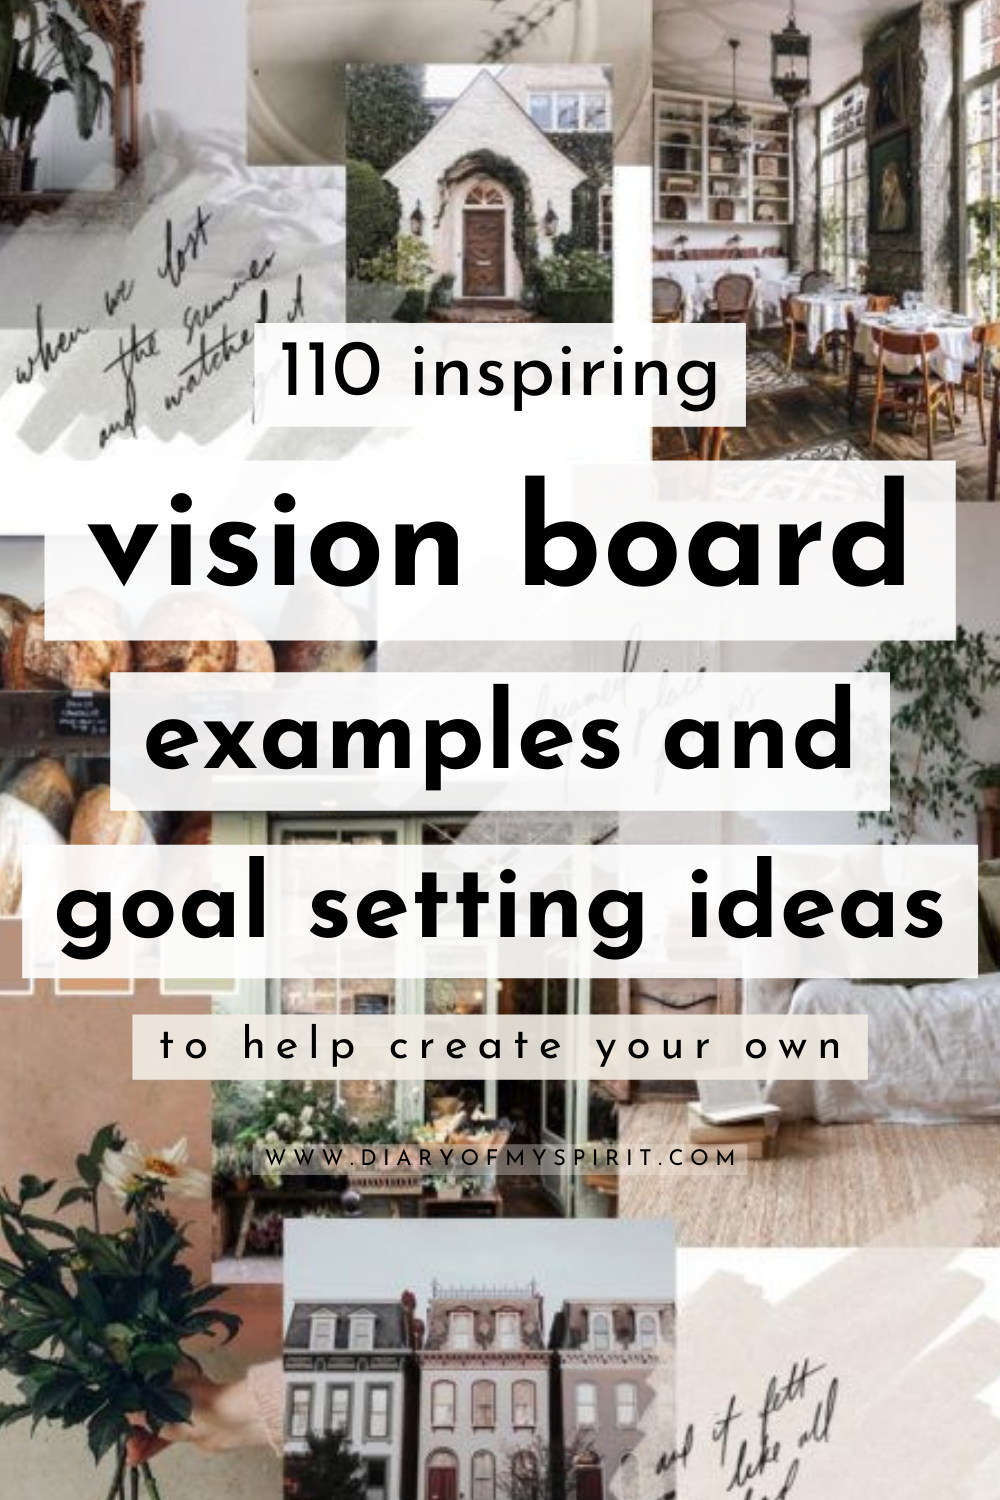 My Vision Board Clip Art Book for Black Men: with Pictures, Words, Phrases, Quotes, and Affirmations to Create Powerful Vision Boards